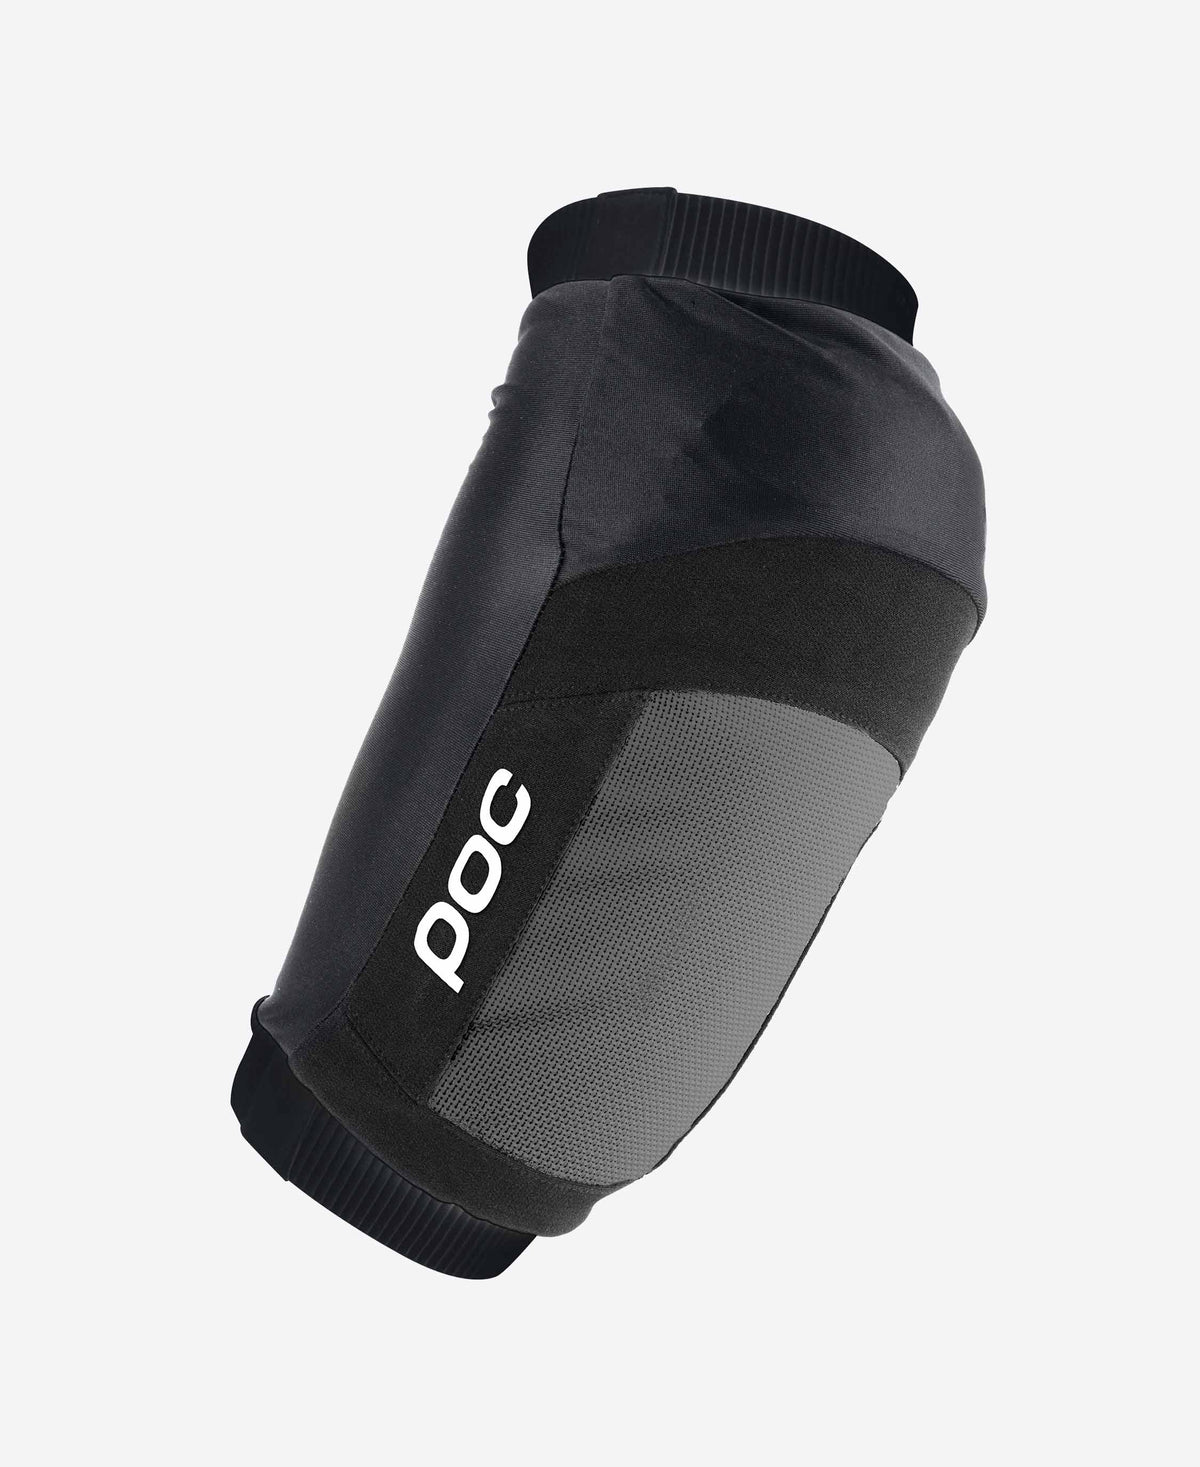 POC JOINT VPD SYSTEM ELBOW PROTECTION